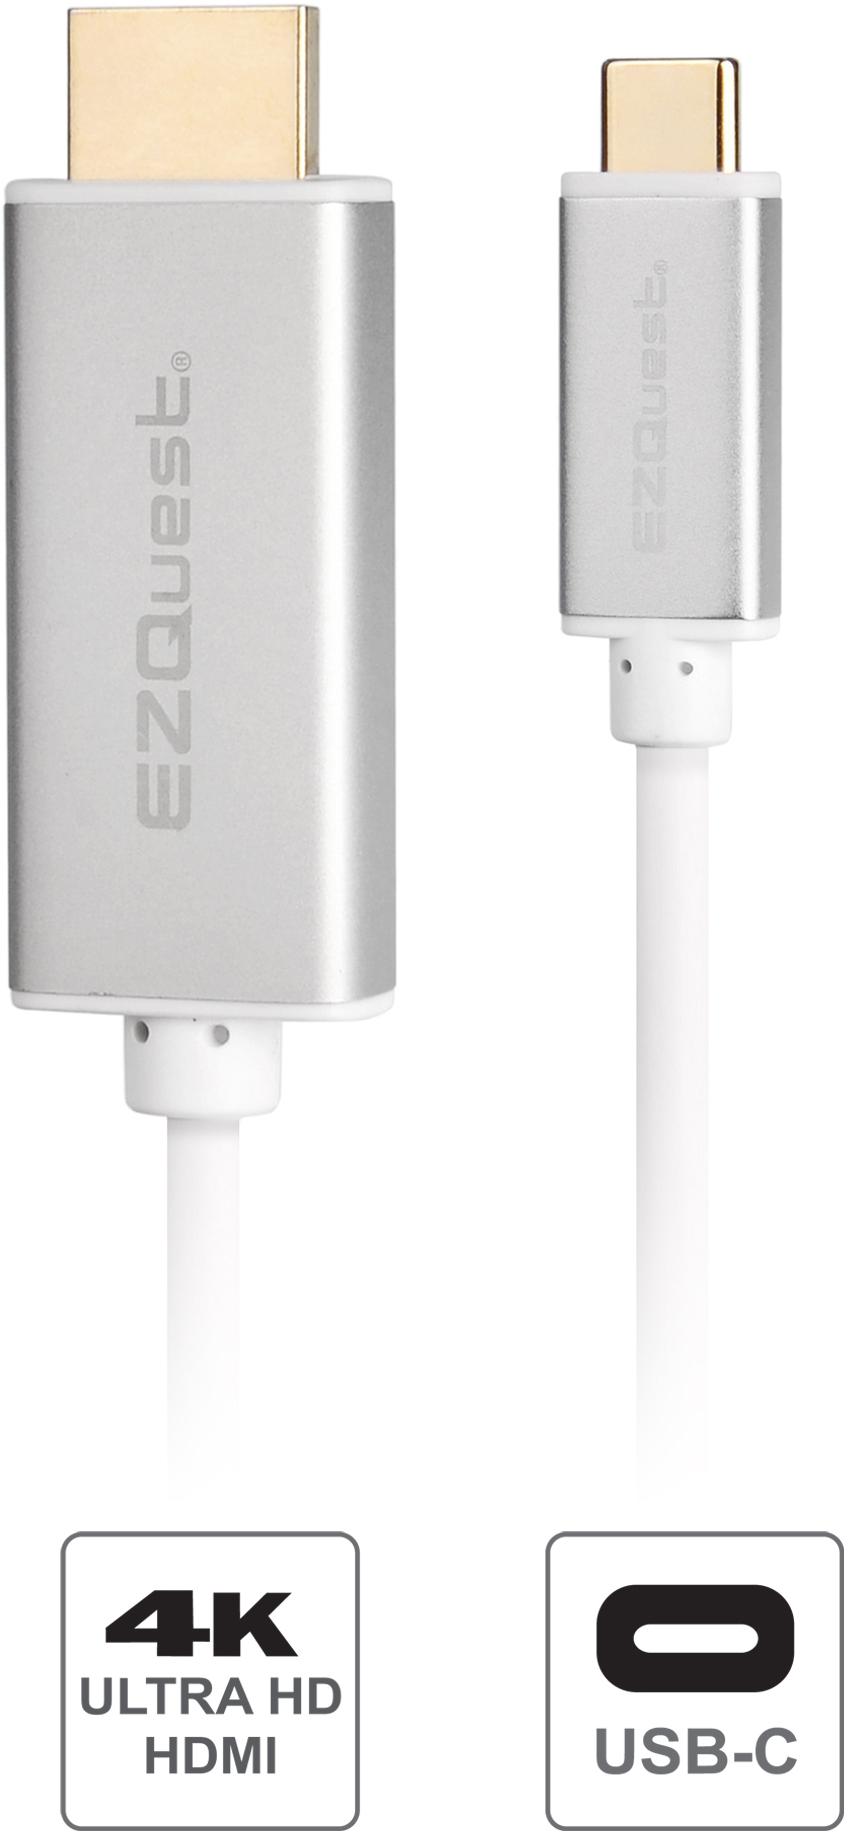 EZQuest USB-C HDMI Cable seamlessly connects